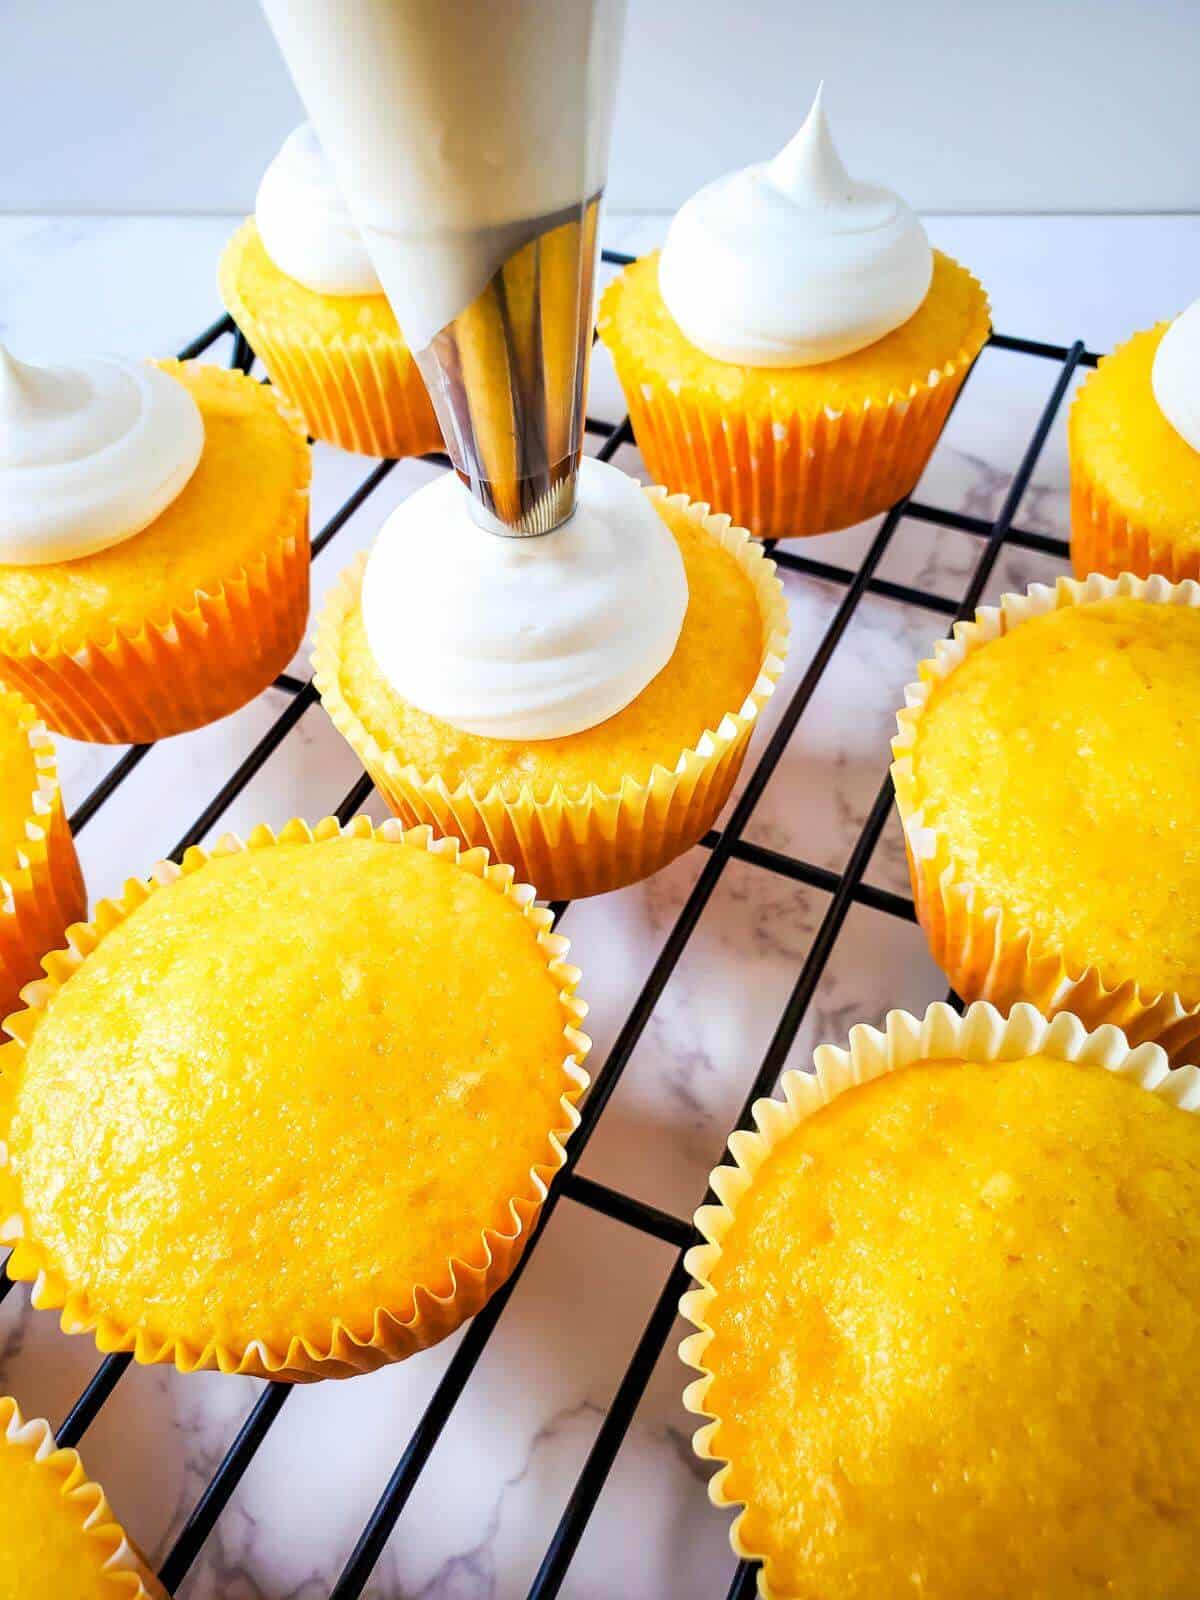 Baked pina colada cupcakes being frosted.